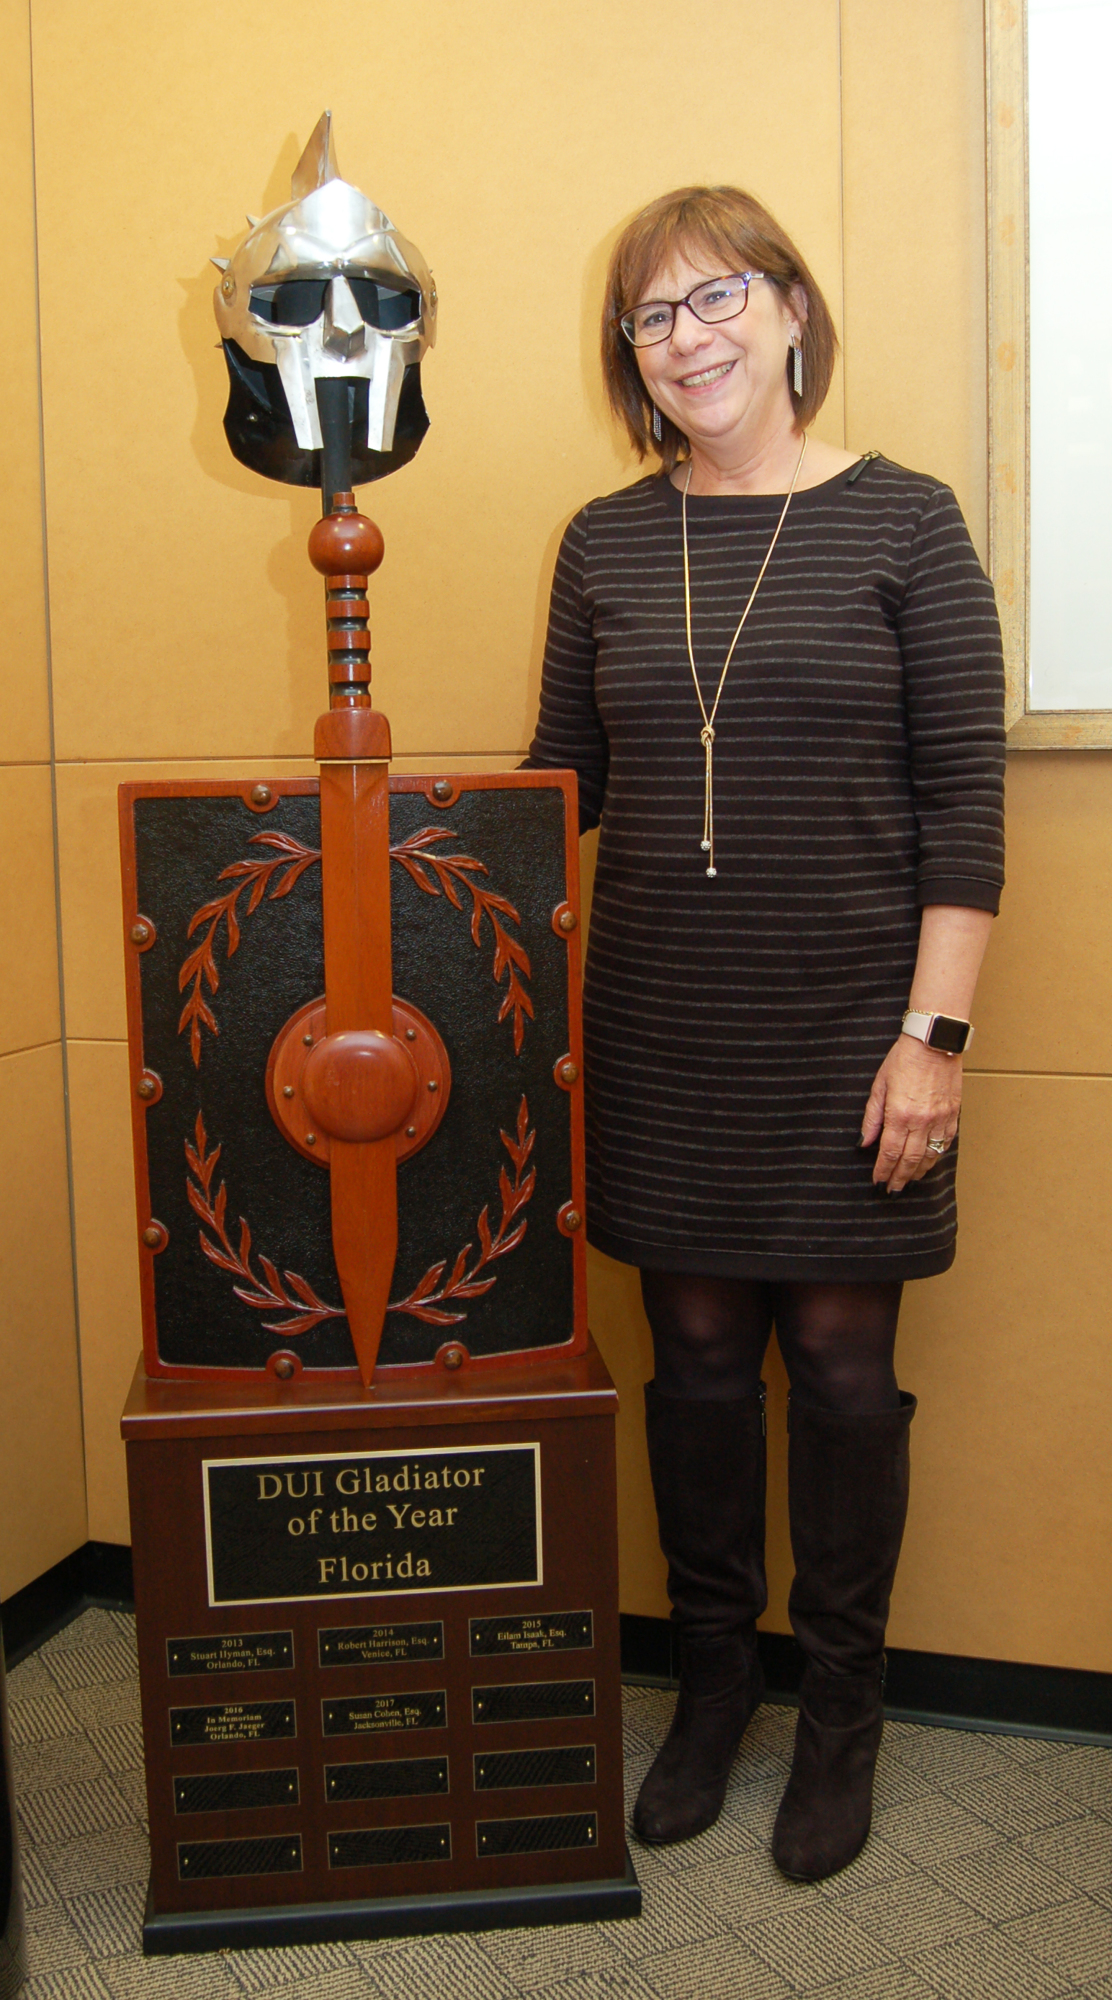 Attorney Susan Cohen and the Florida Association of Criminal Defense Lawyers’ “DUI Gladiator” award, which is presented each year to the group’s top DUI defense attorney.